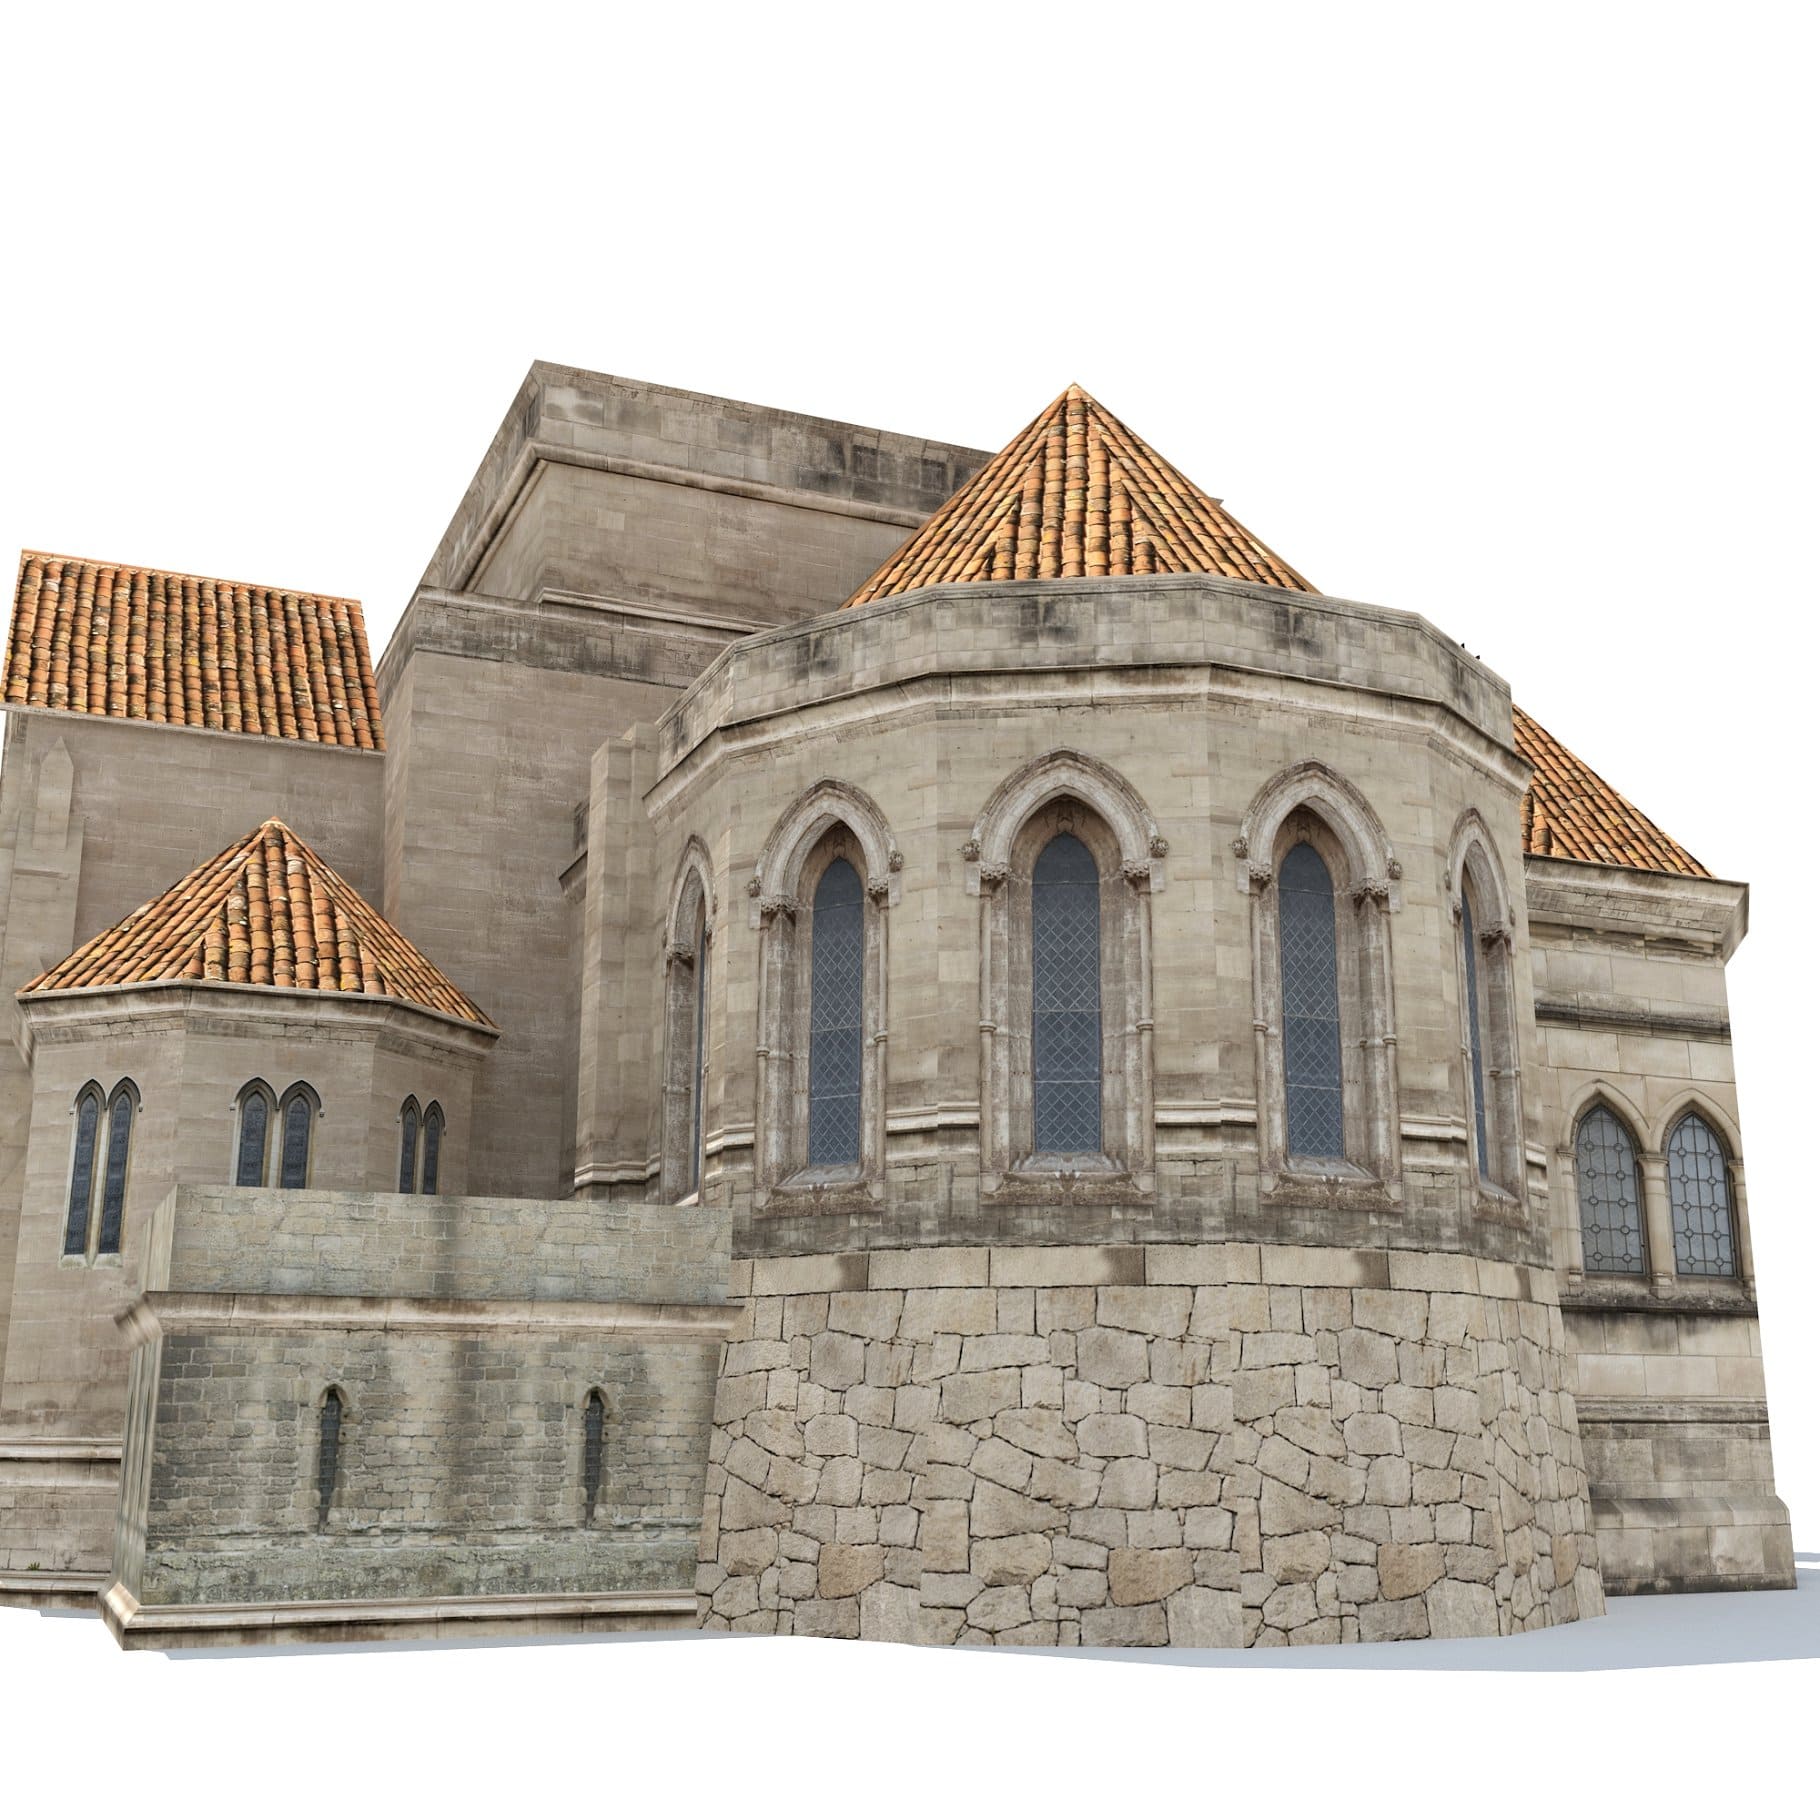 3D model of a church building with a relief ornament.